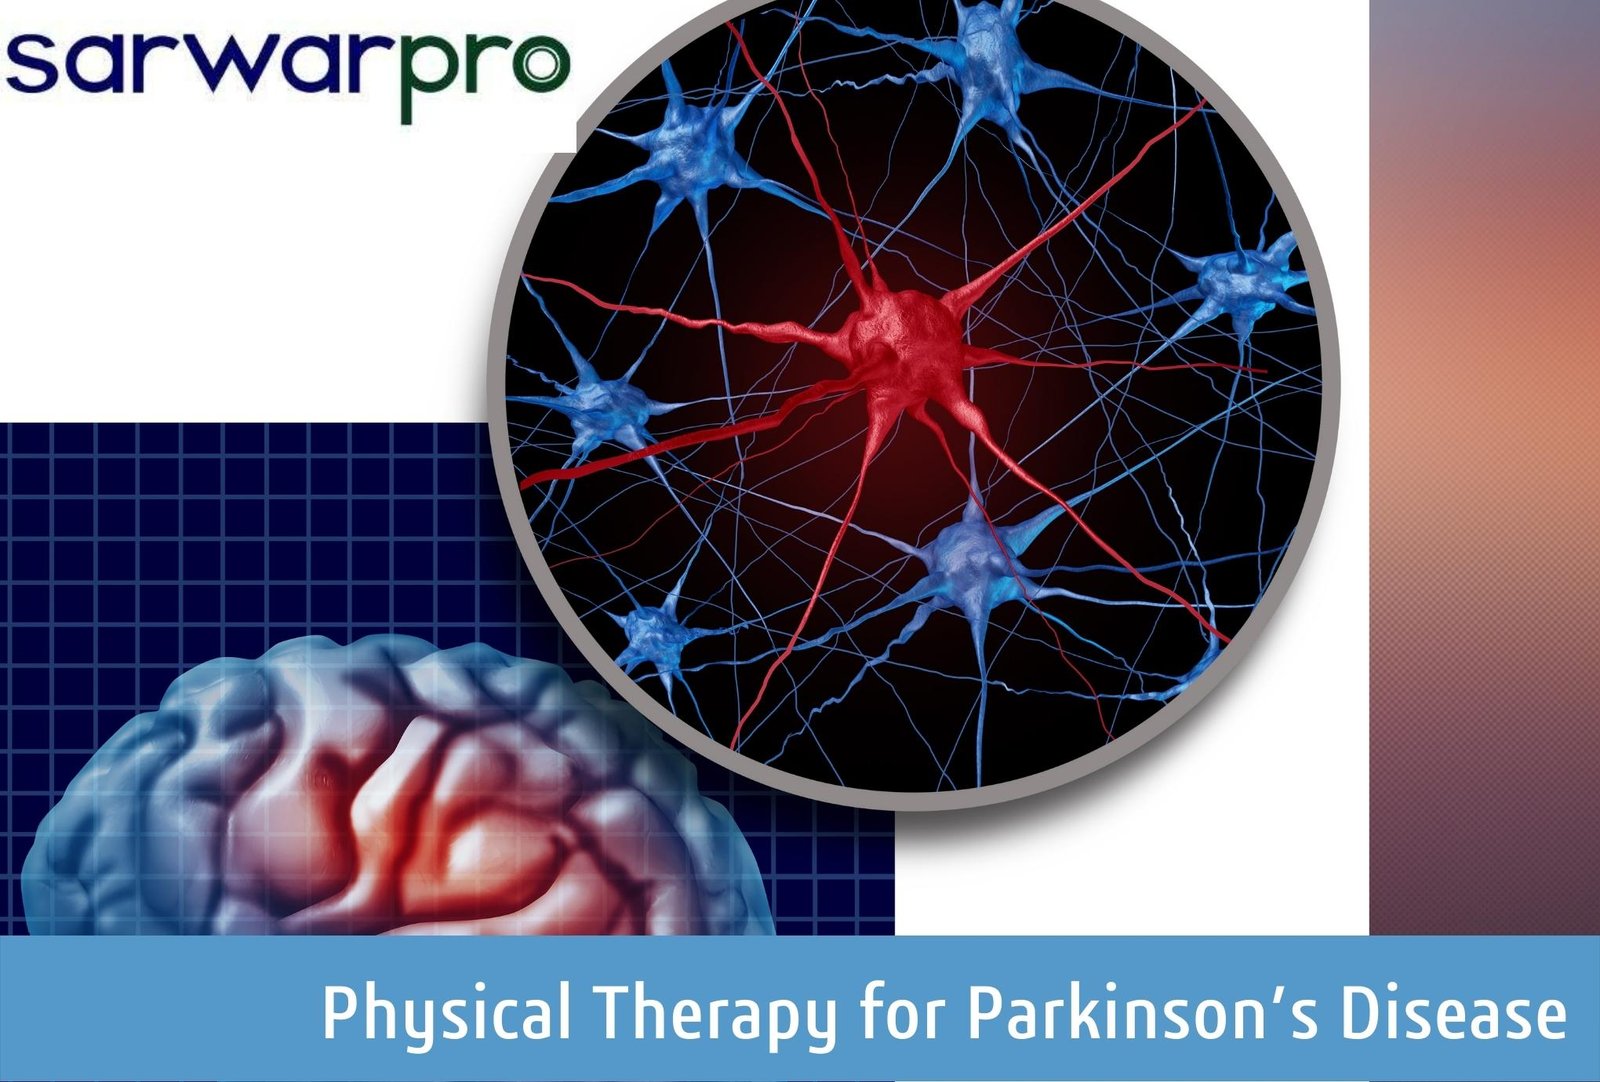 44938physical-therapy-for-parkinson.jpg